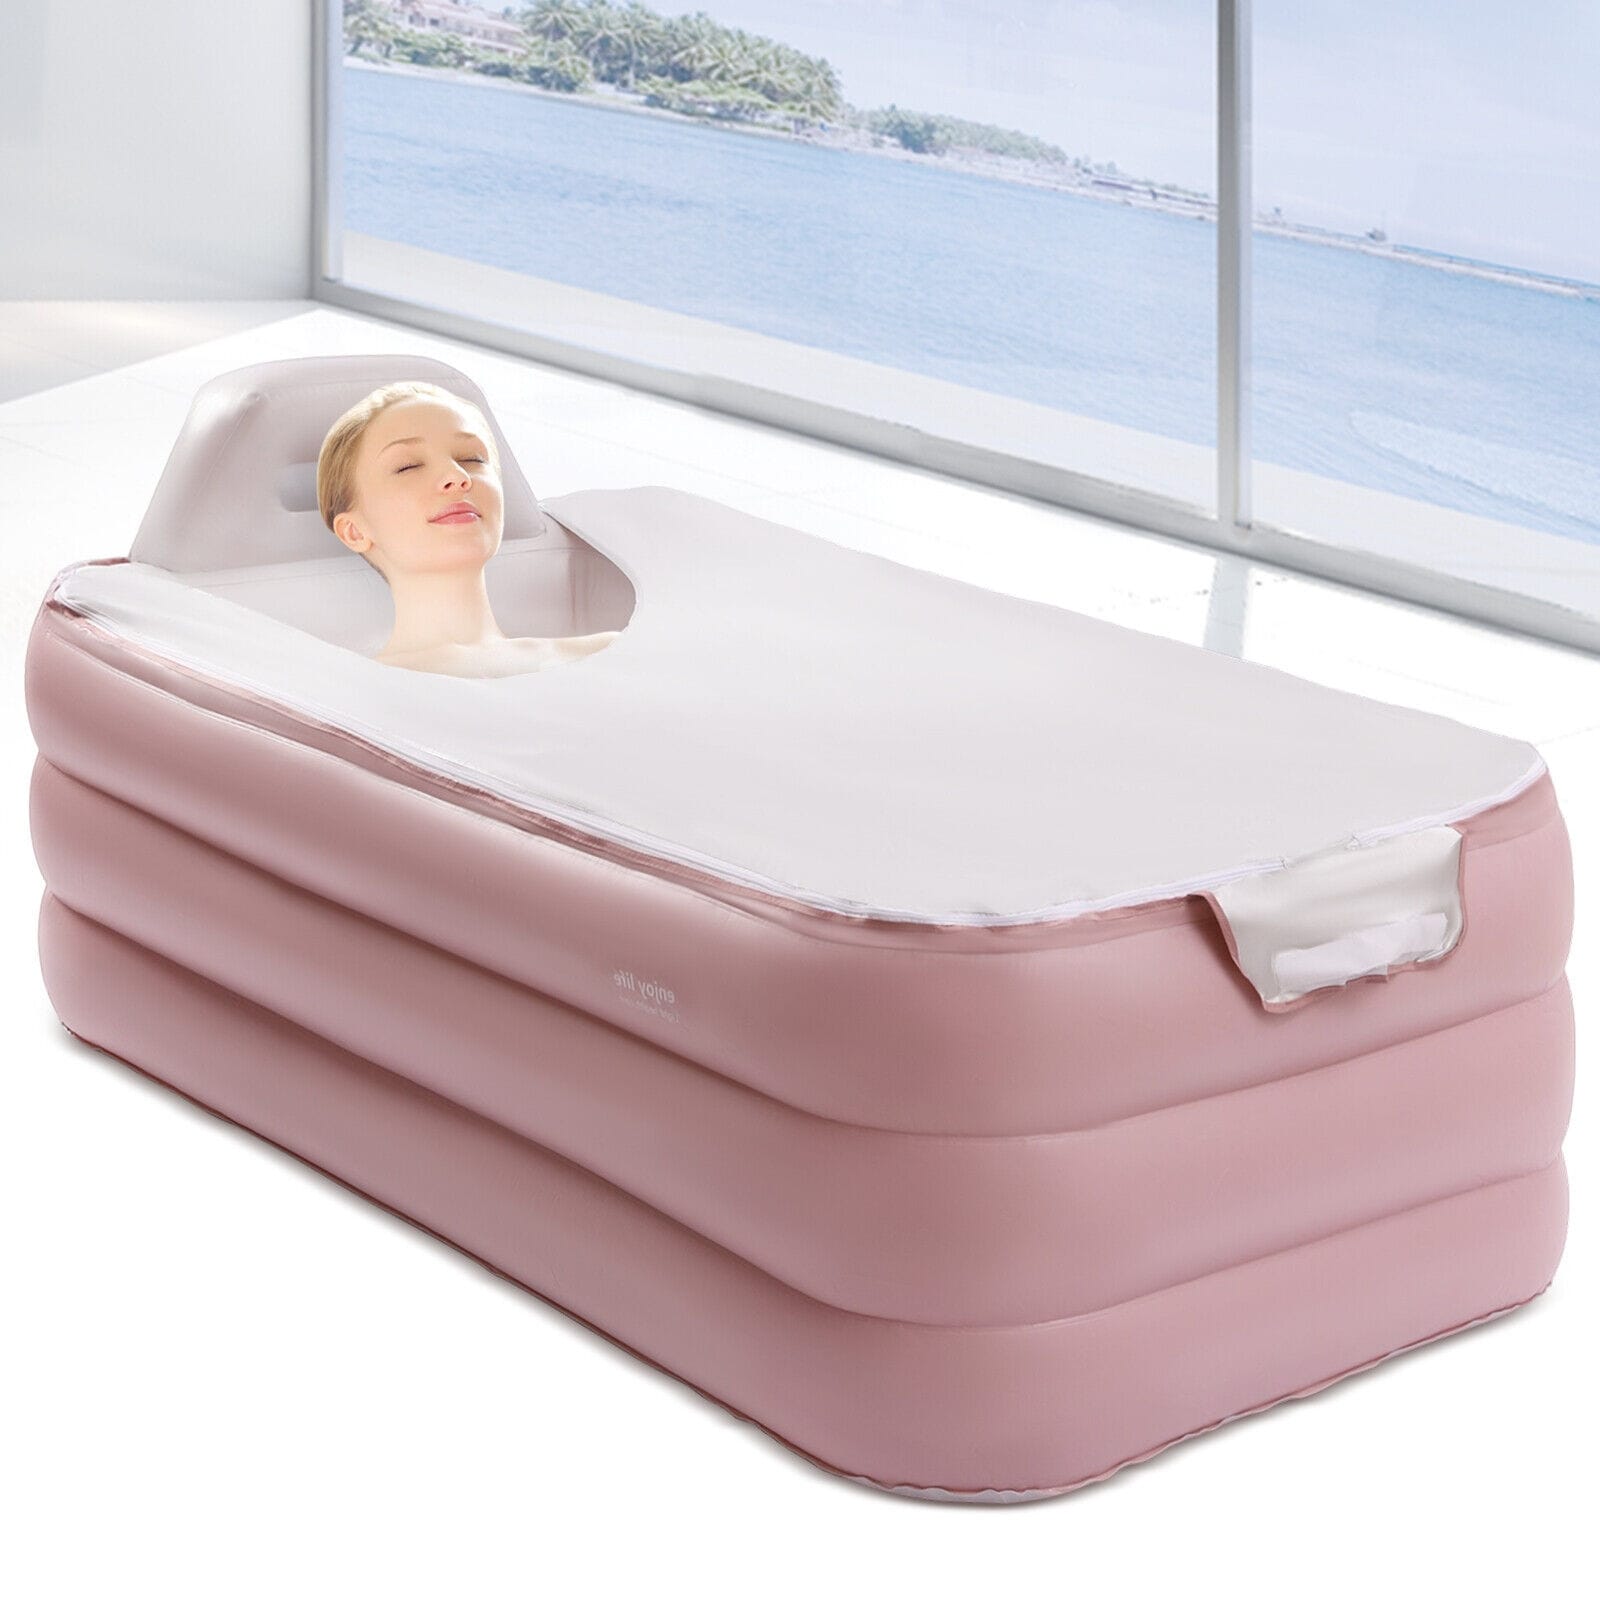 Mixoy Extra Large Adult Portable Bathtub with 2 Side Handles and Waterproof  Pillow,Foldable Tub for Ice Bath and Hot Shower - On Sale - Bed Bath &  Beyond - 38996147